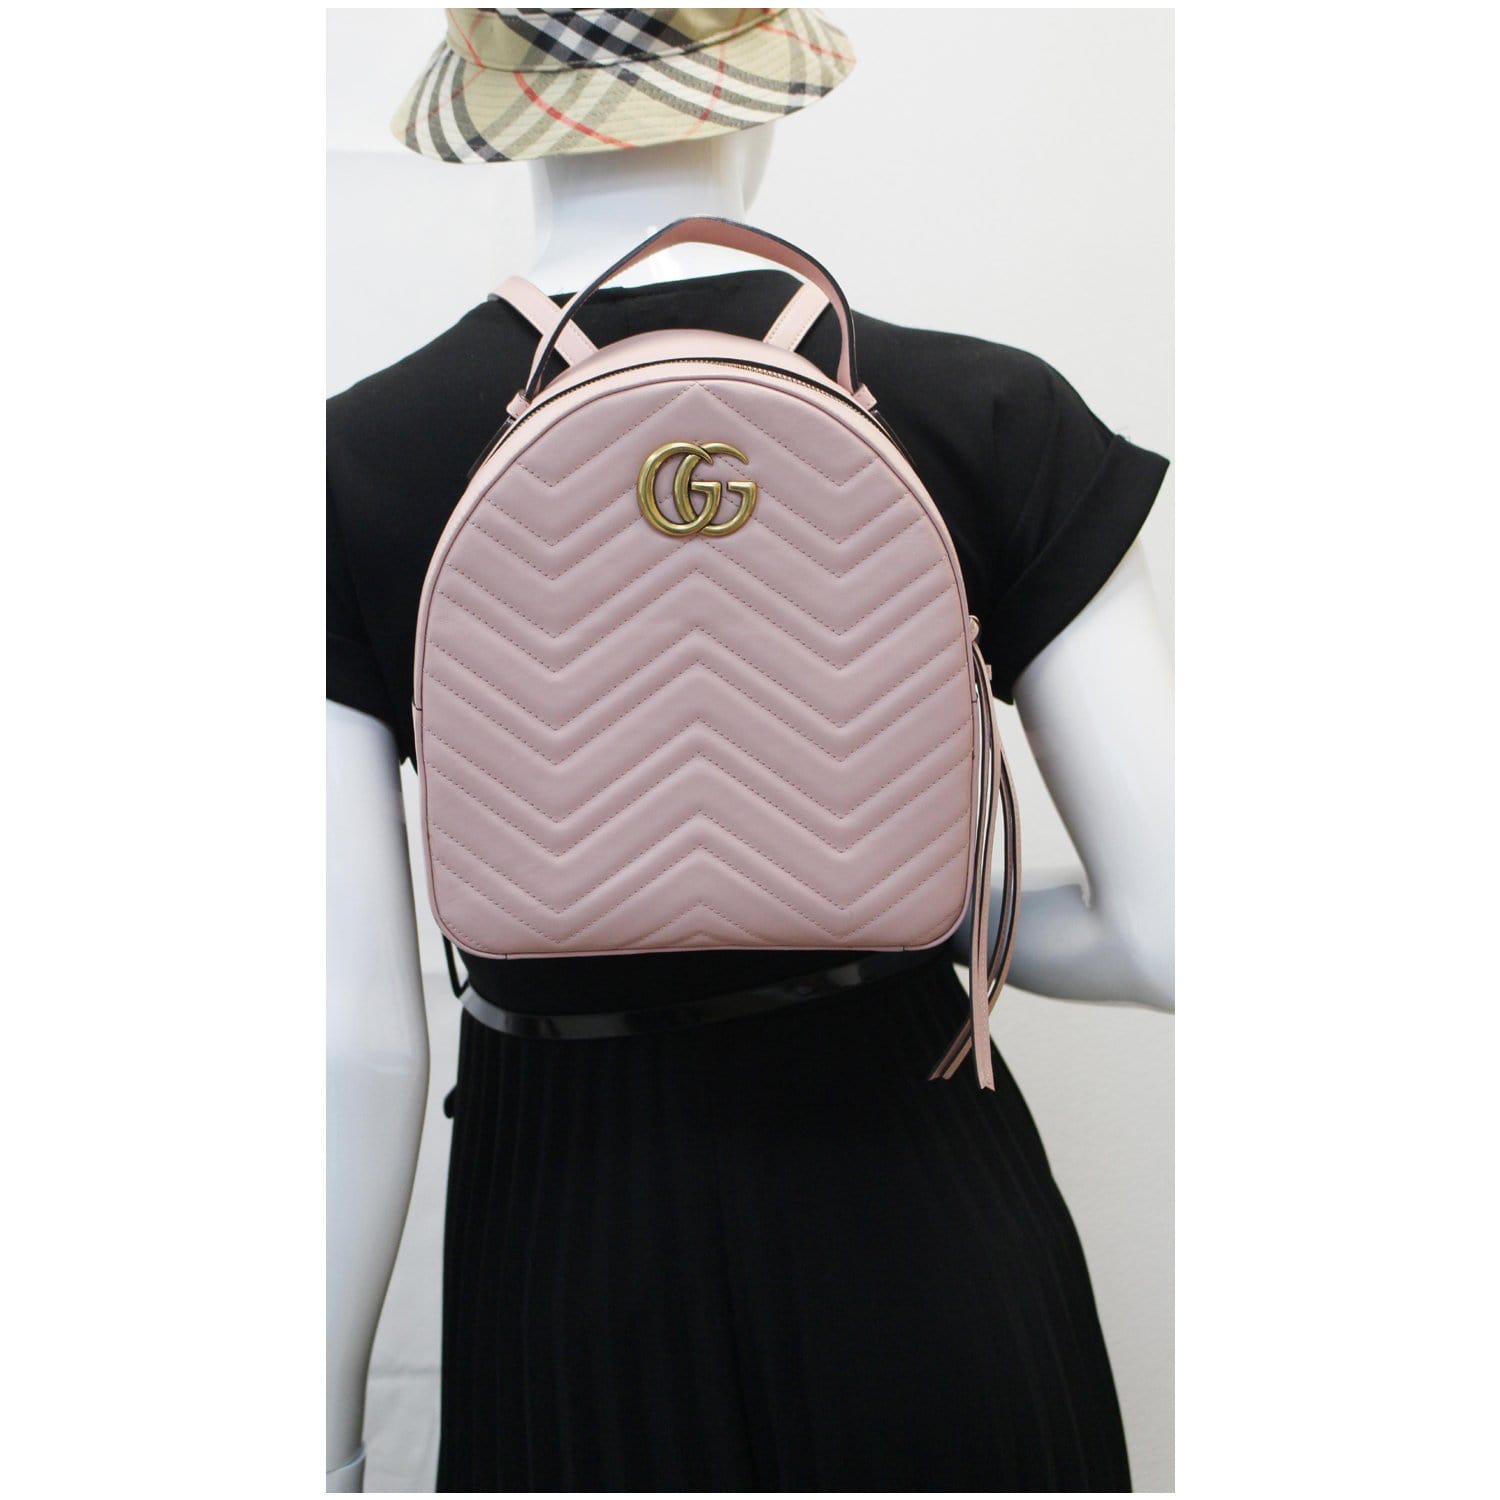 Gucci Pink GG Marmont Leather Backpack